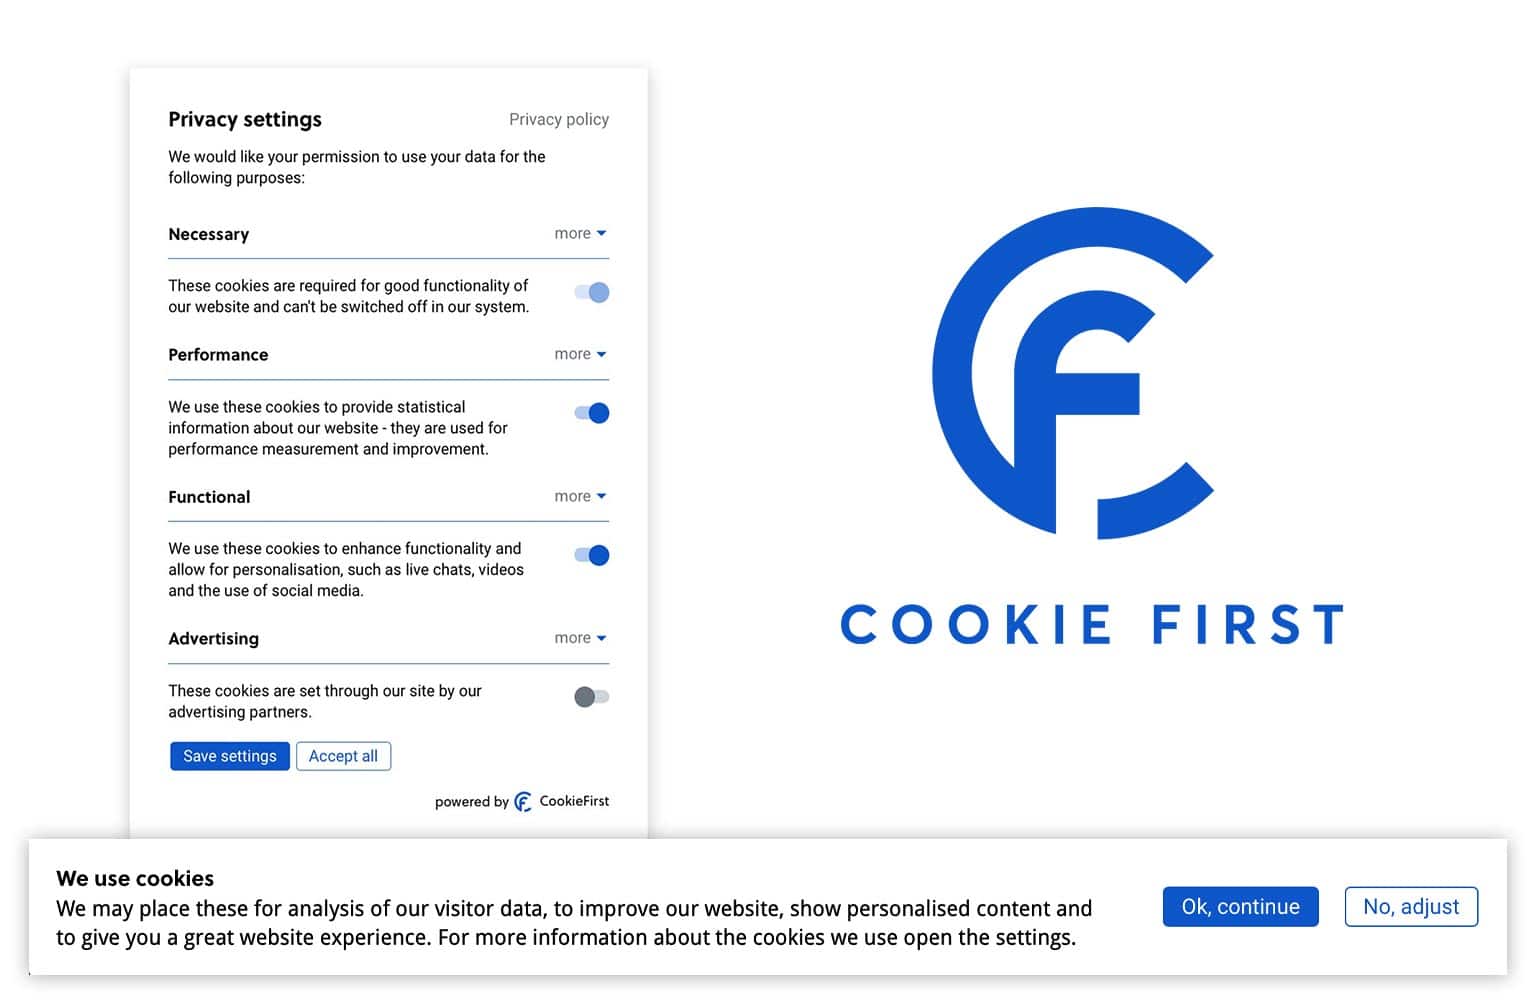 ePrivacy Regulation - CookieFirst is a complete cookie compliancy solution for websites